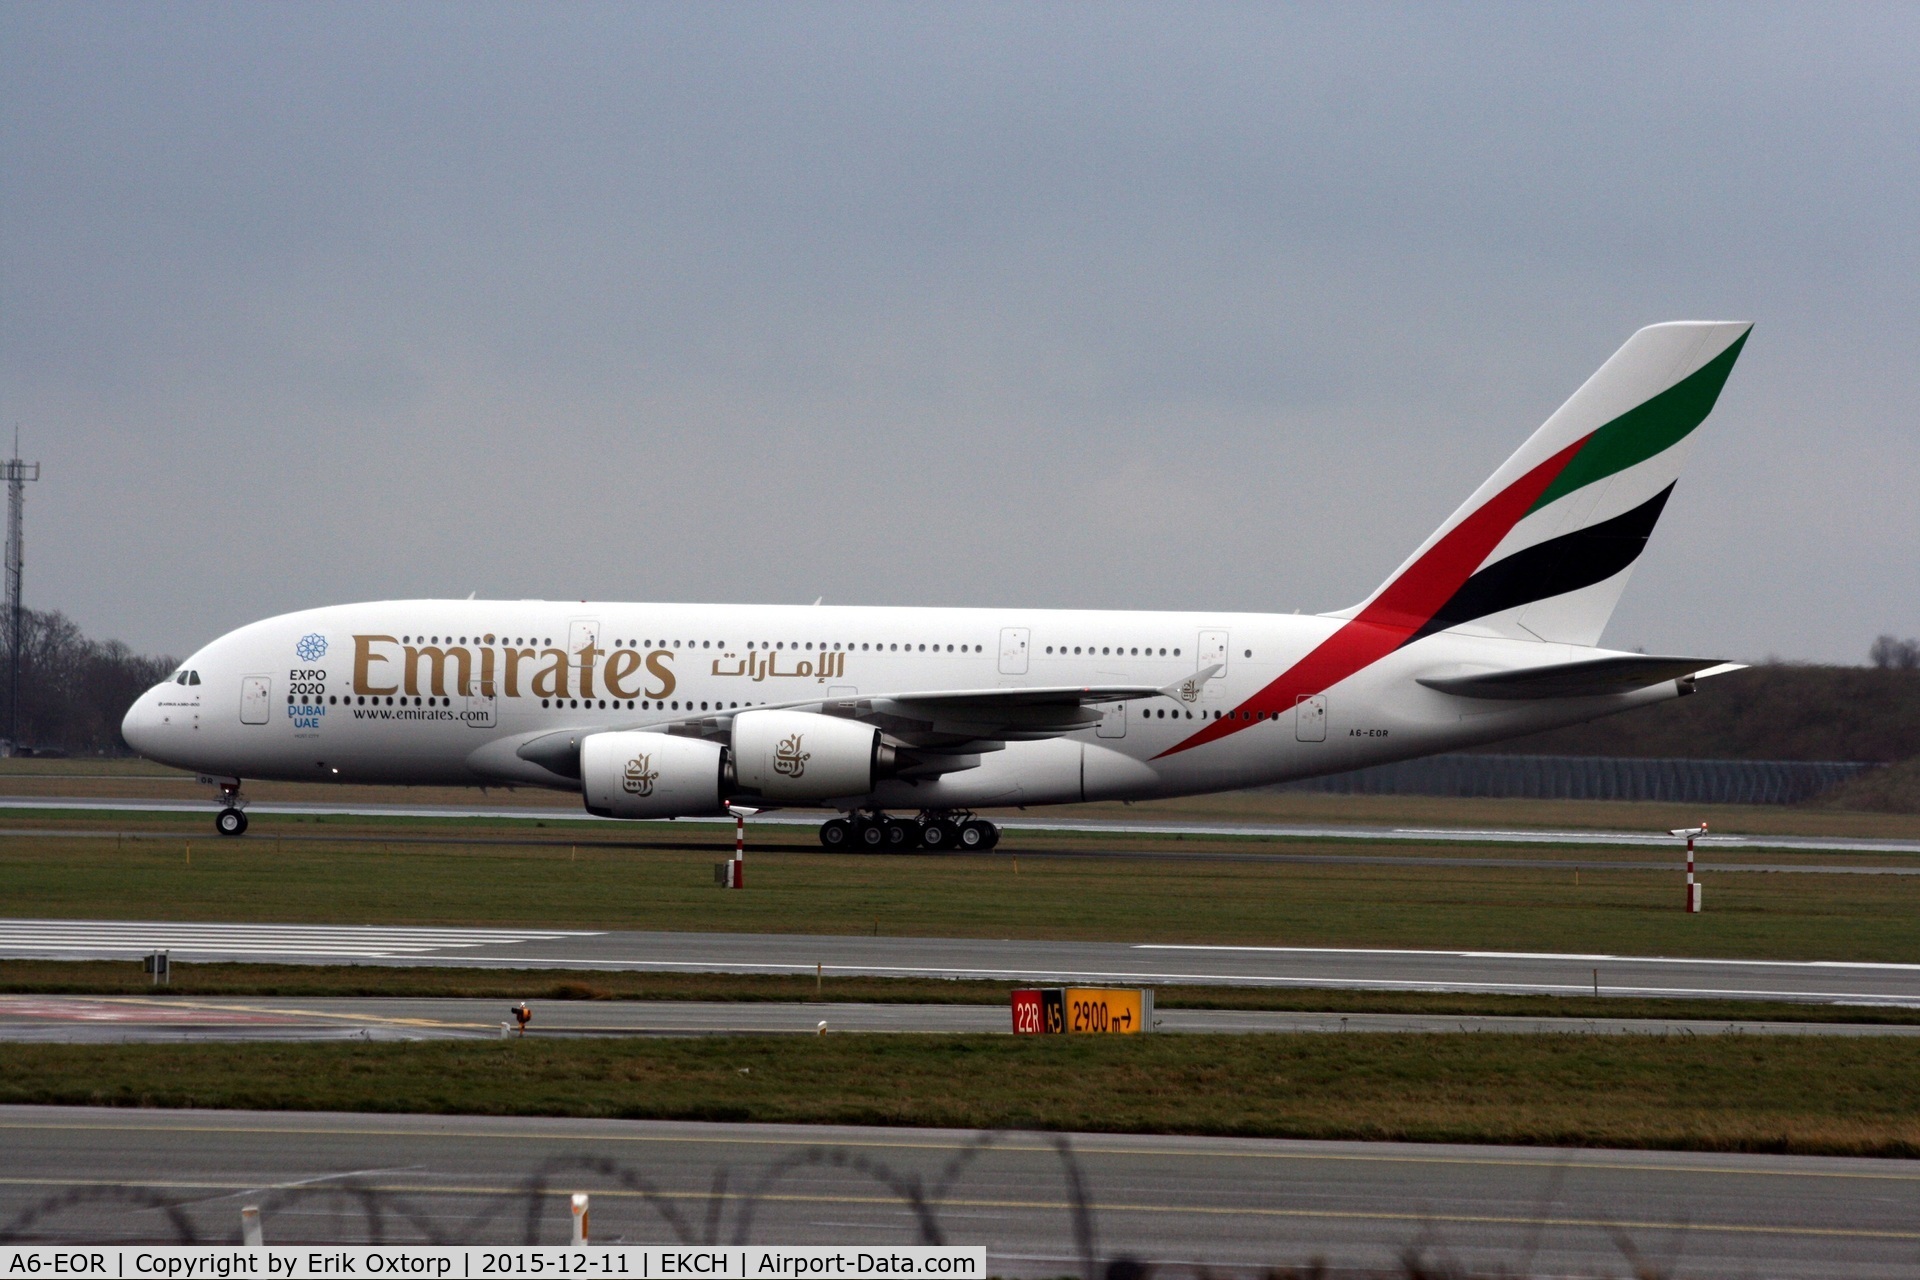 A6-EOR, 2015 Airbus A380-861 C/N 202, A6-EOR just arrived